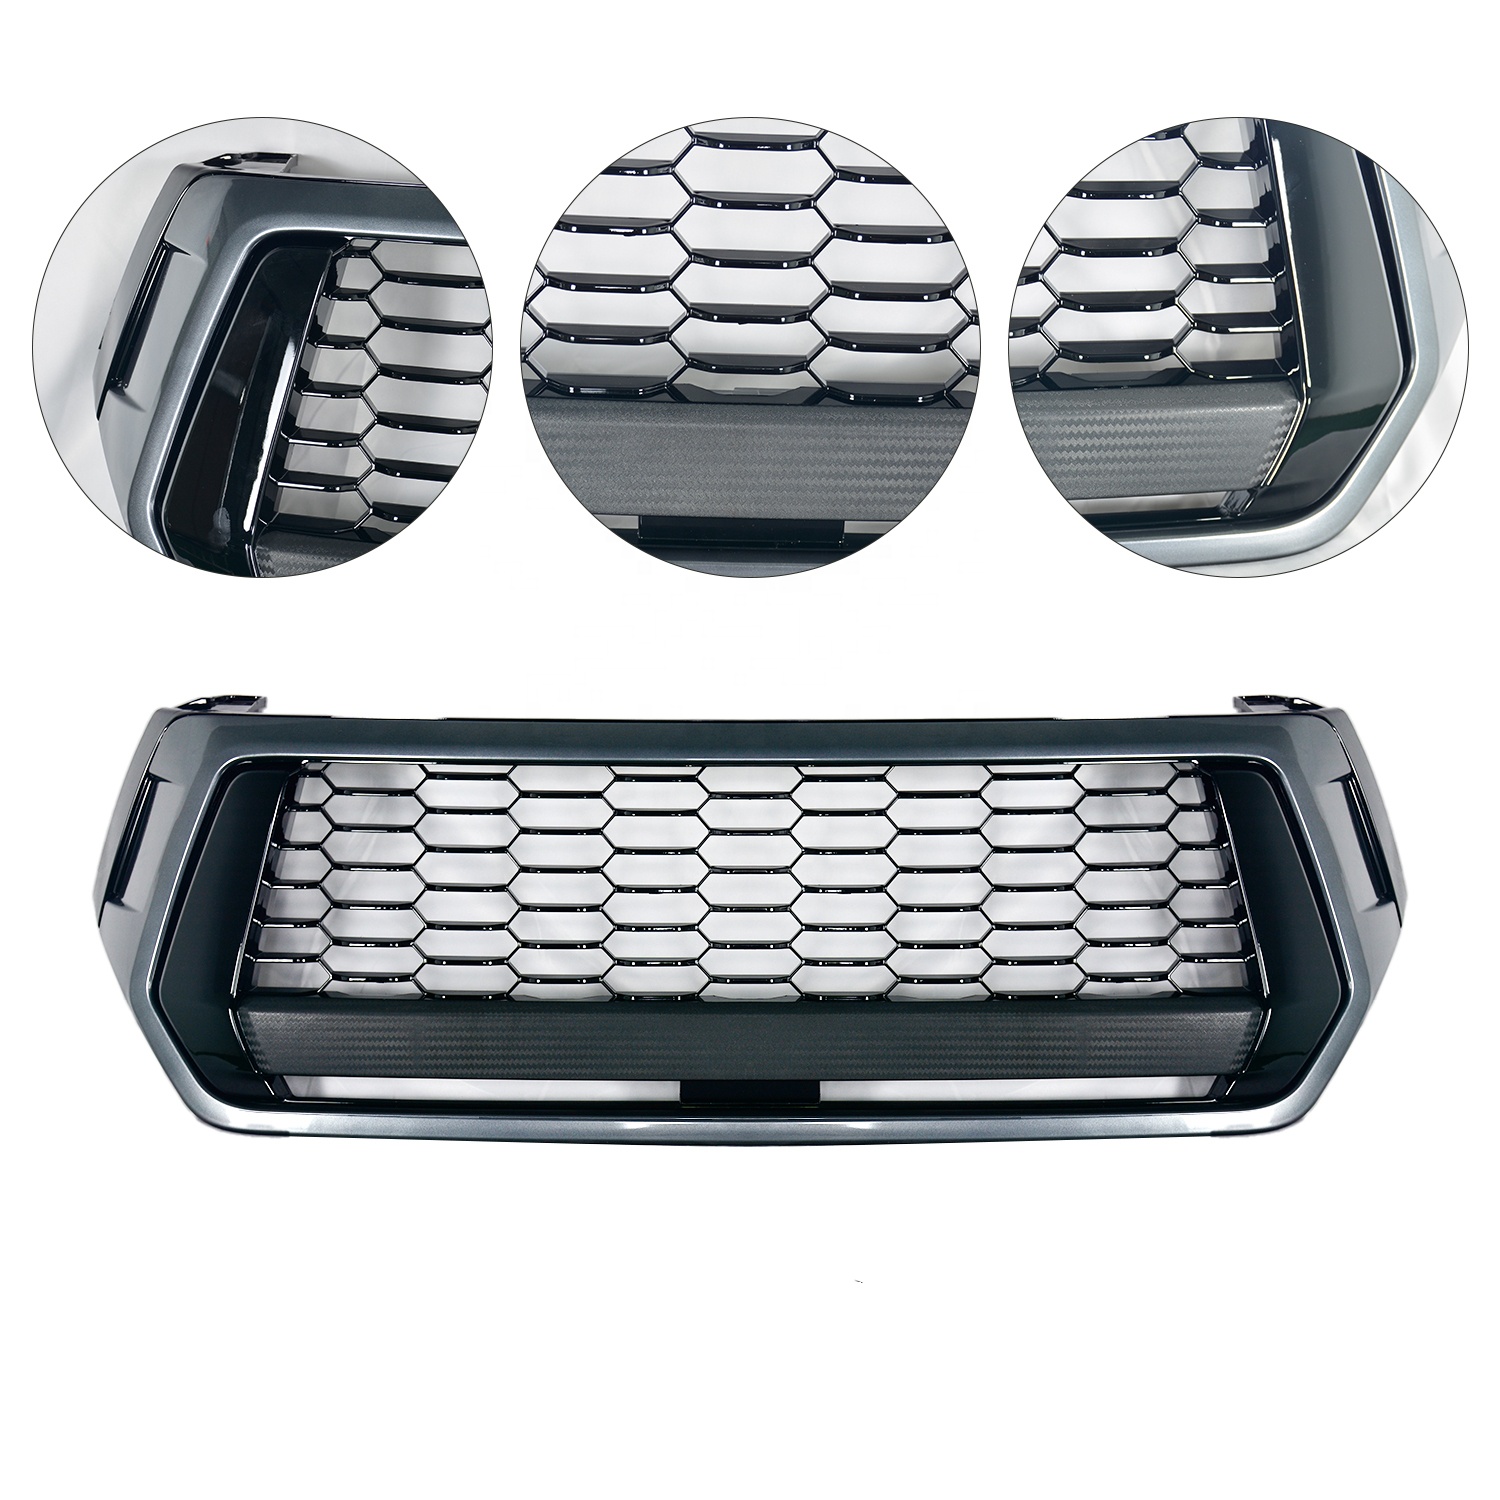 HW 4X4 Pickup Car Accessories Front Mesh Grille For Hilux Rocco 2018-2020